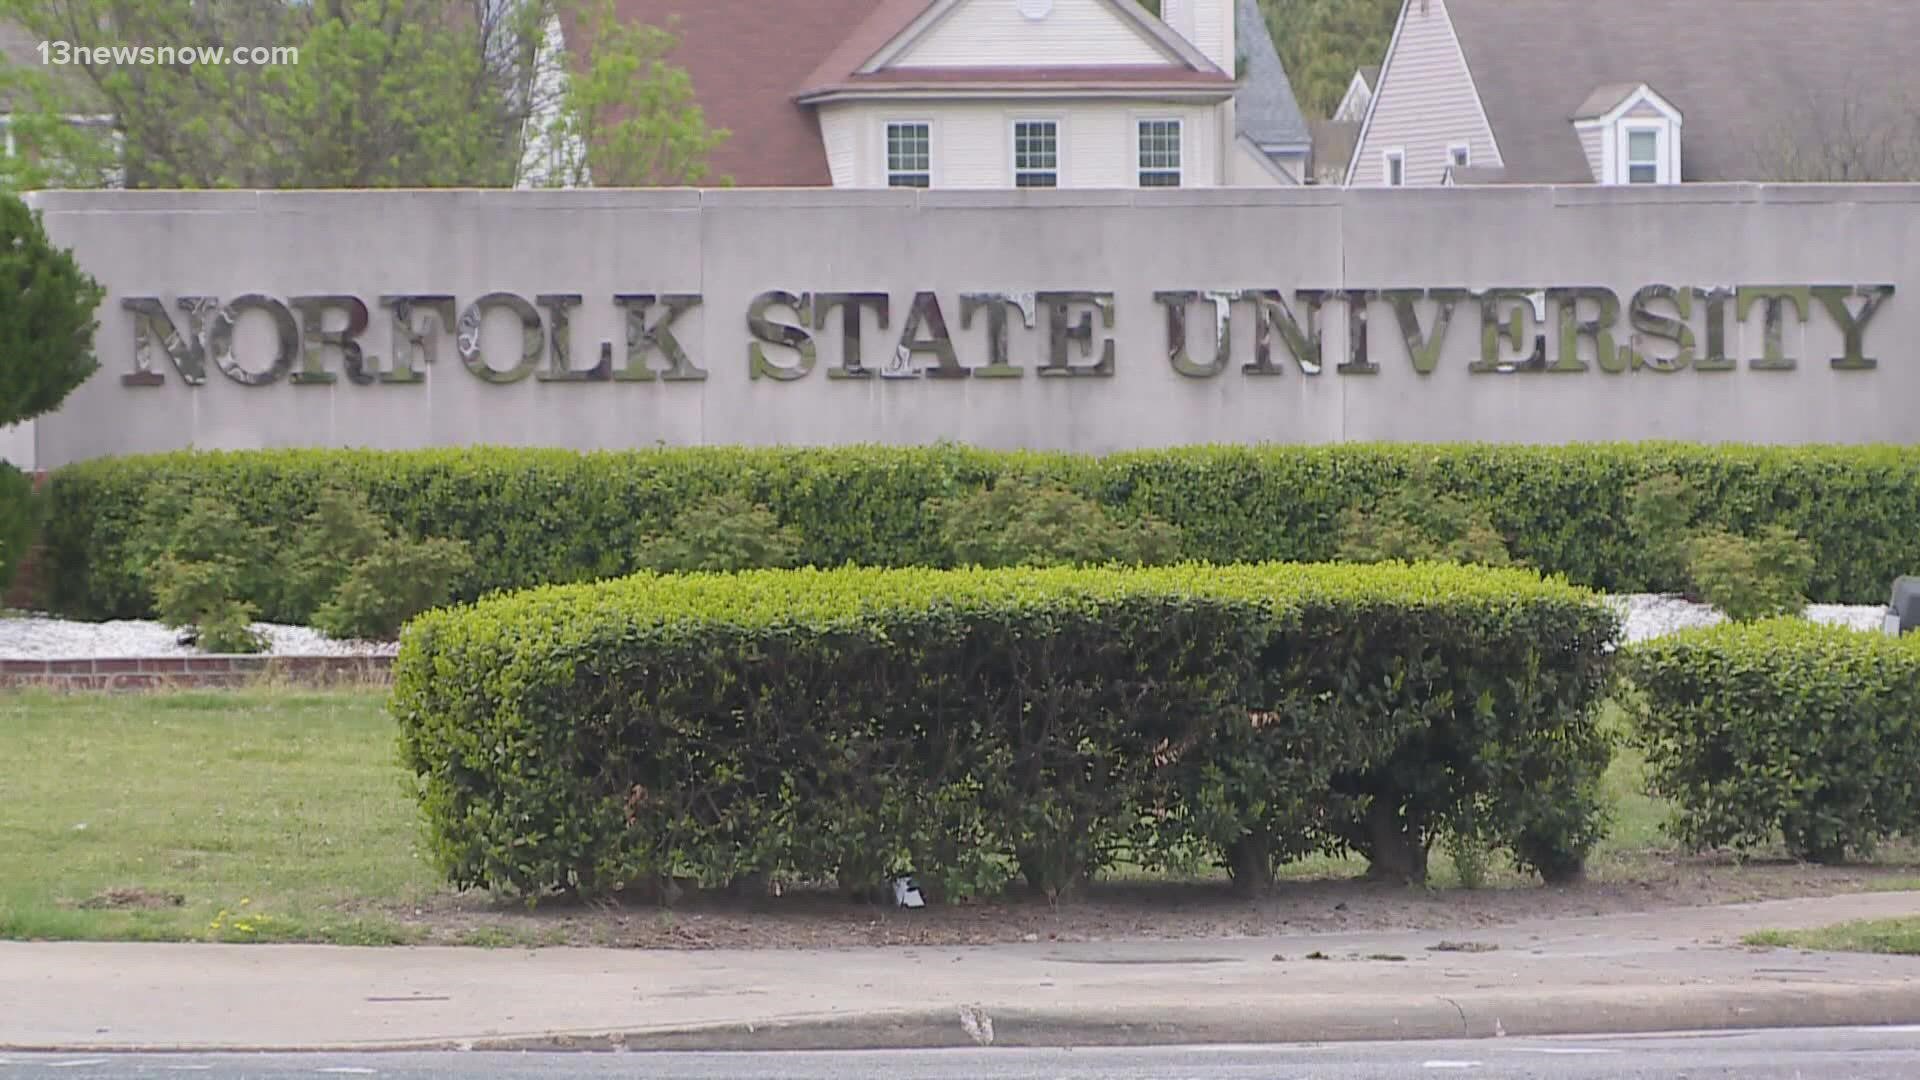 Norfolk State University already requires students and staff to get the COVID-19 vaccine, but now visitors will also have to abide by the rules.